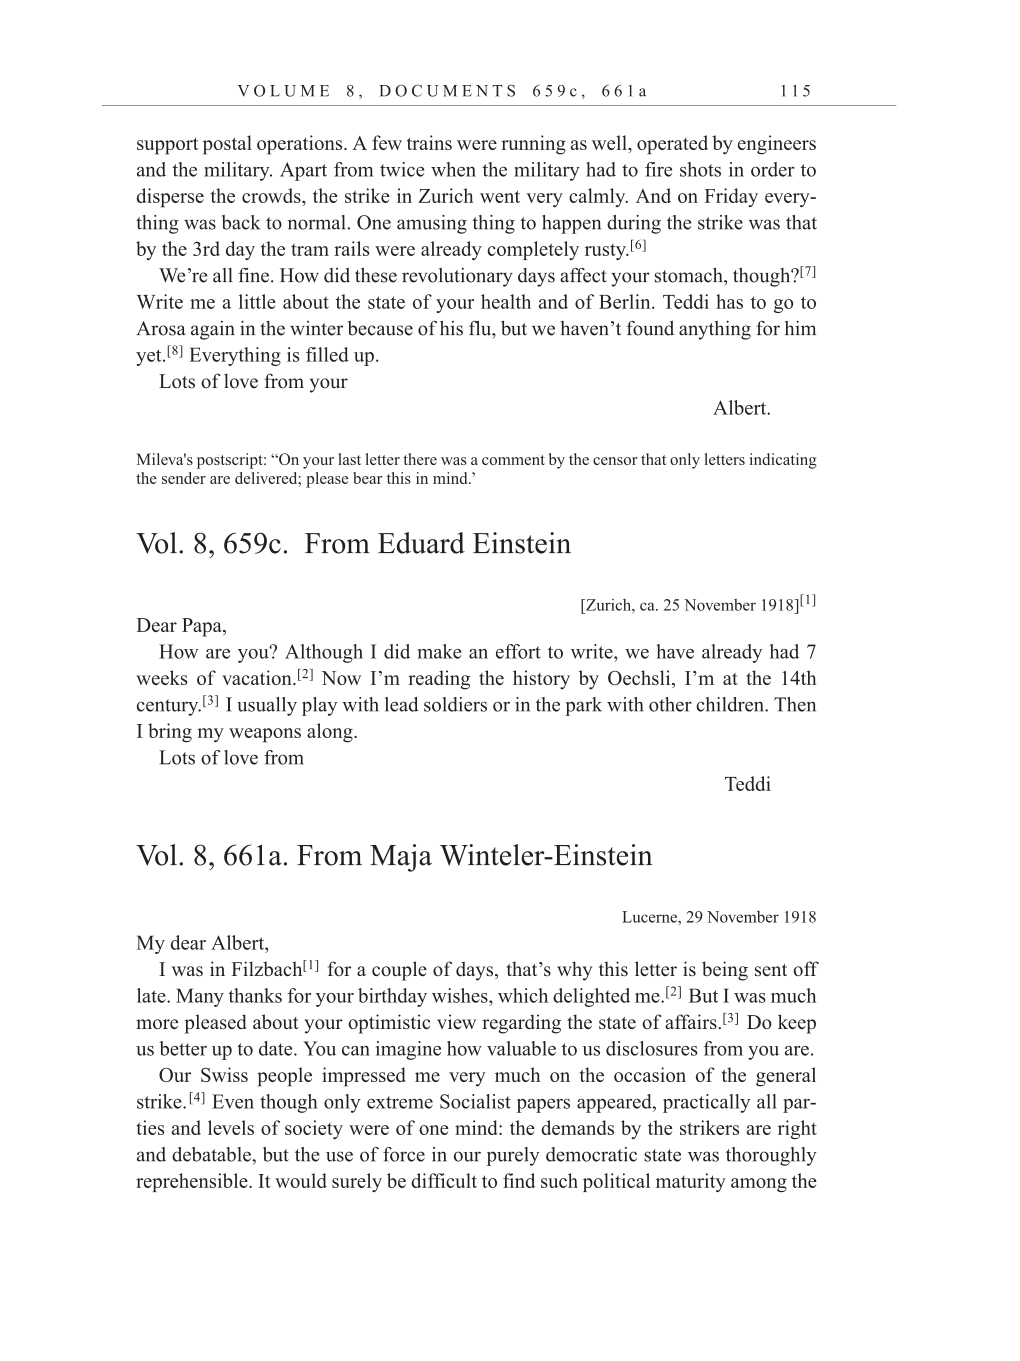 Volume 10: The Berlin Years: Correspondence, May-December 1920, and Supplementary Correspondence, 1909-1920 (English translation supplement) page 115